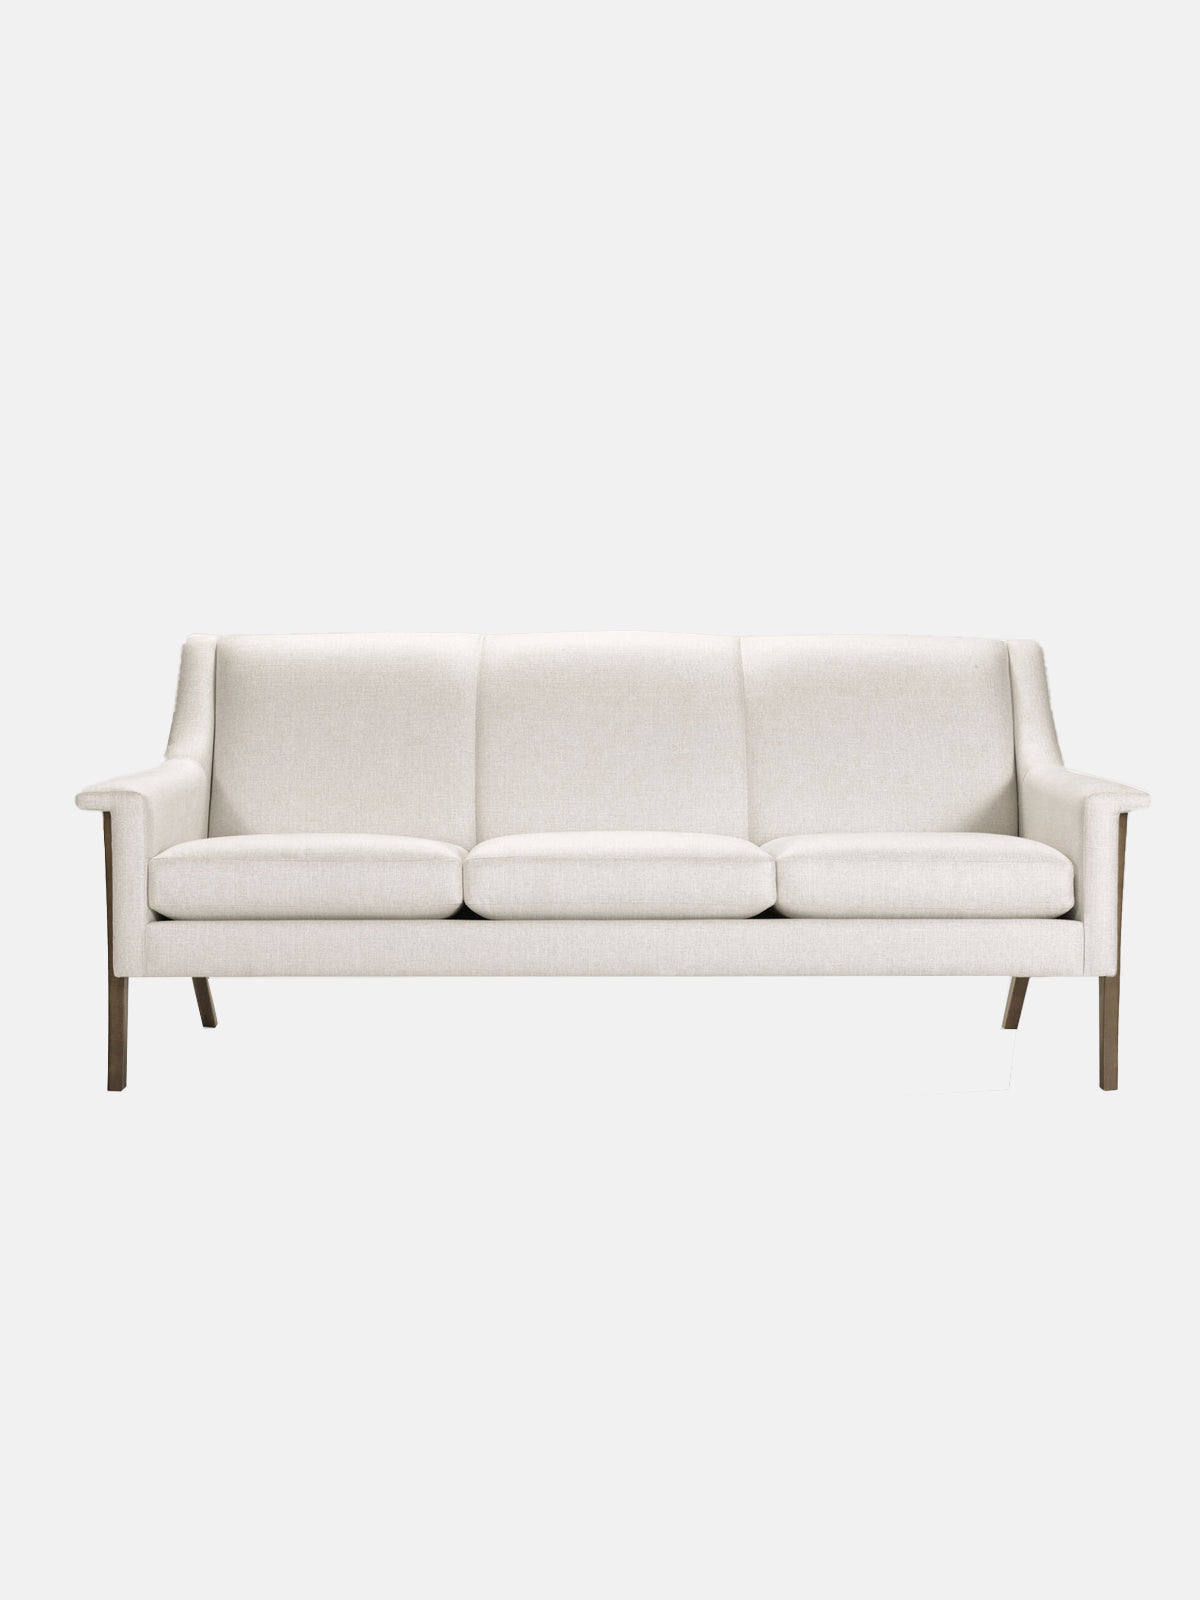 The Muse Sofa